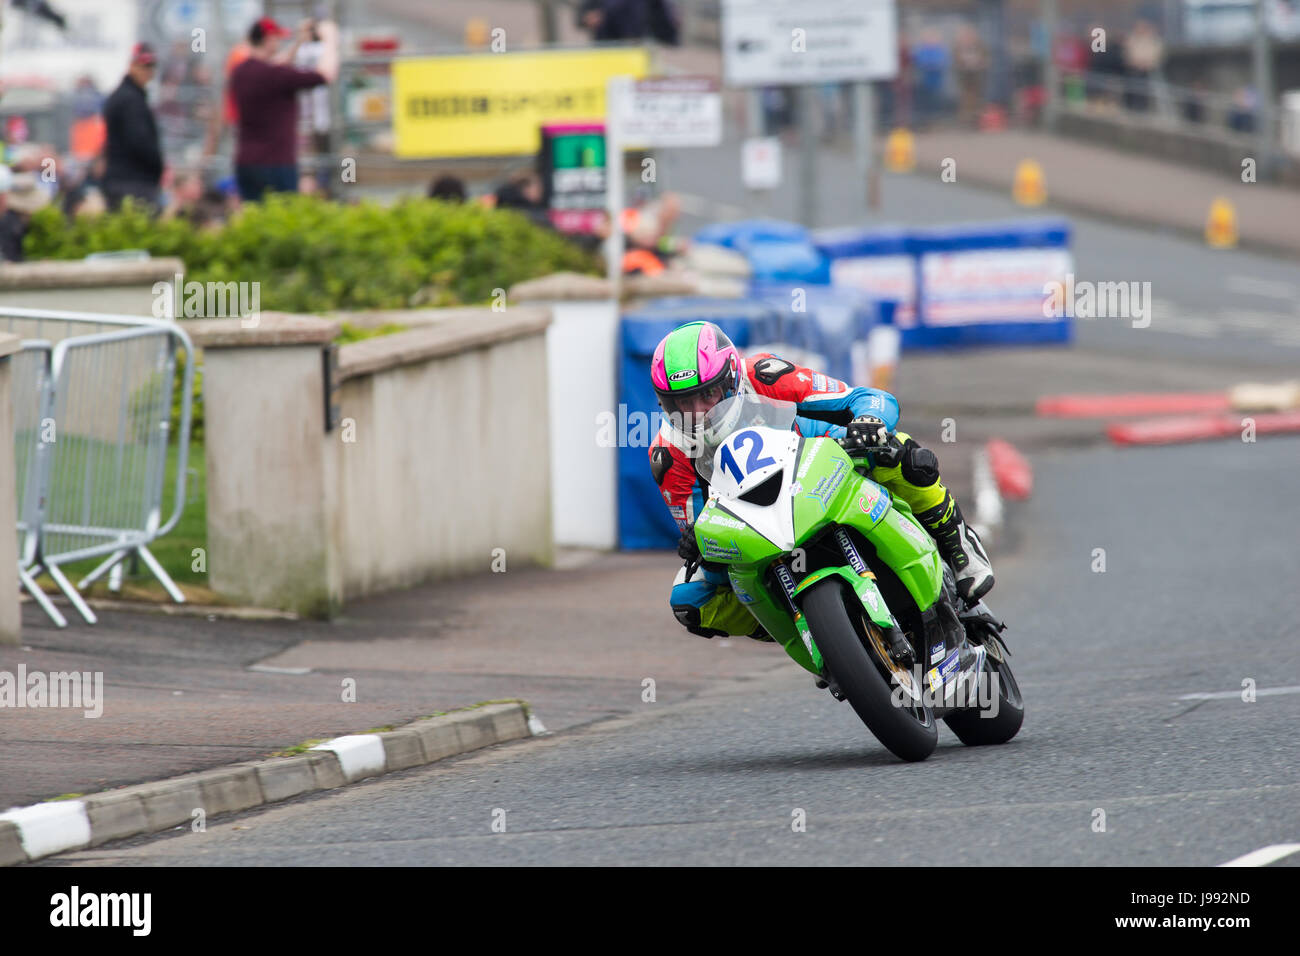 North West 200 International Motorcycle Road Races Stock Photo